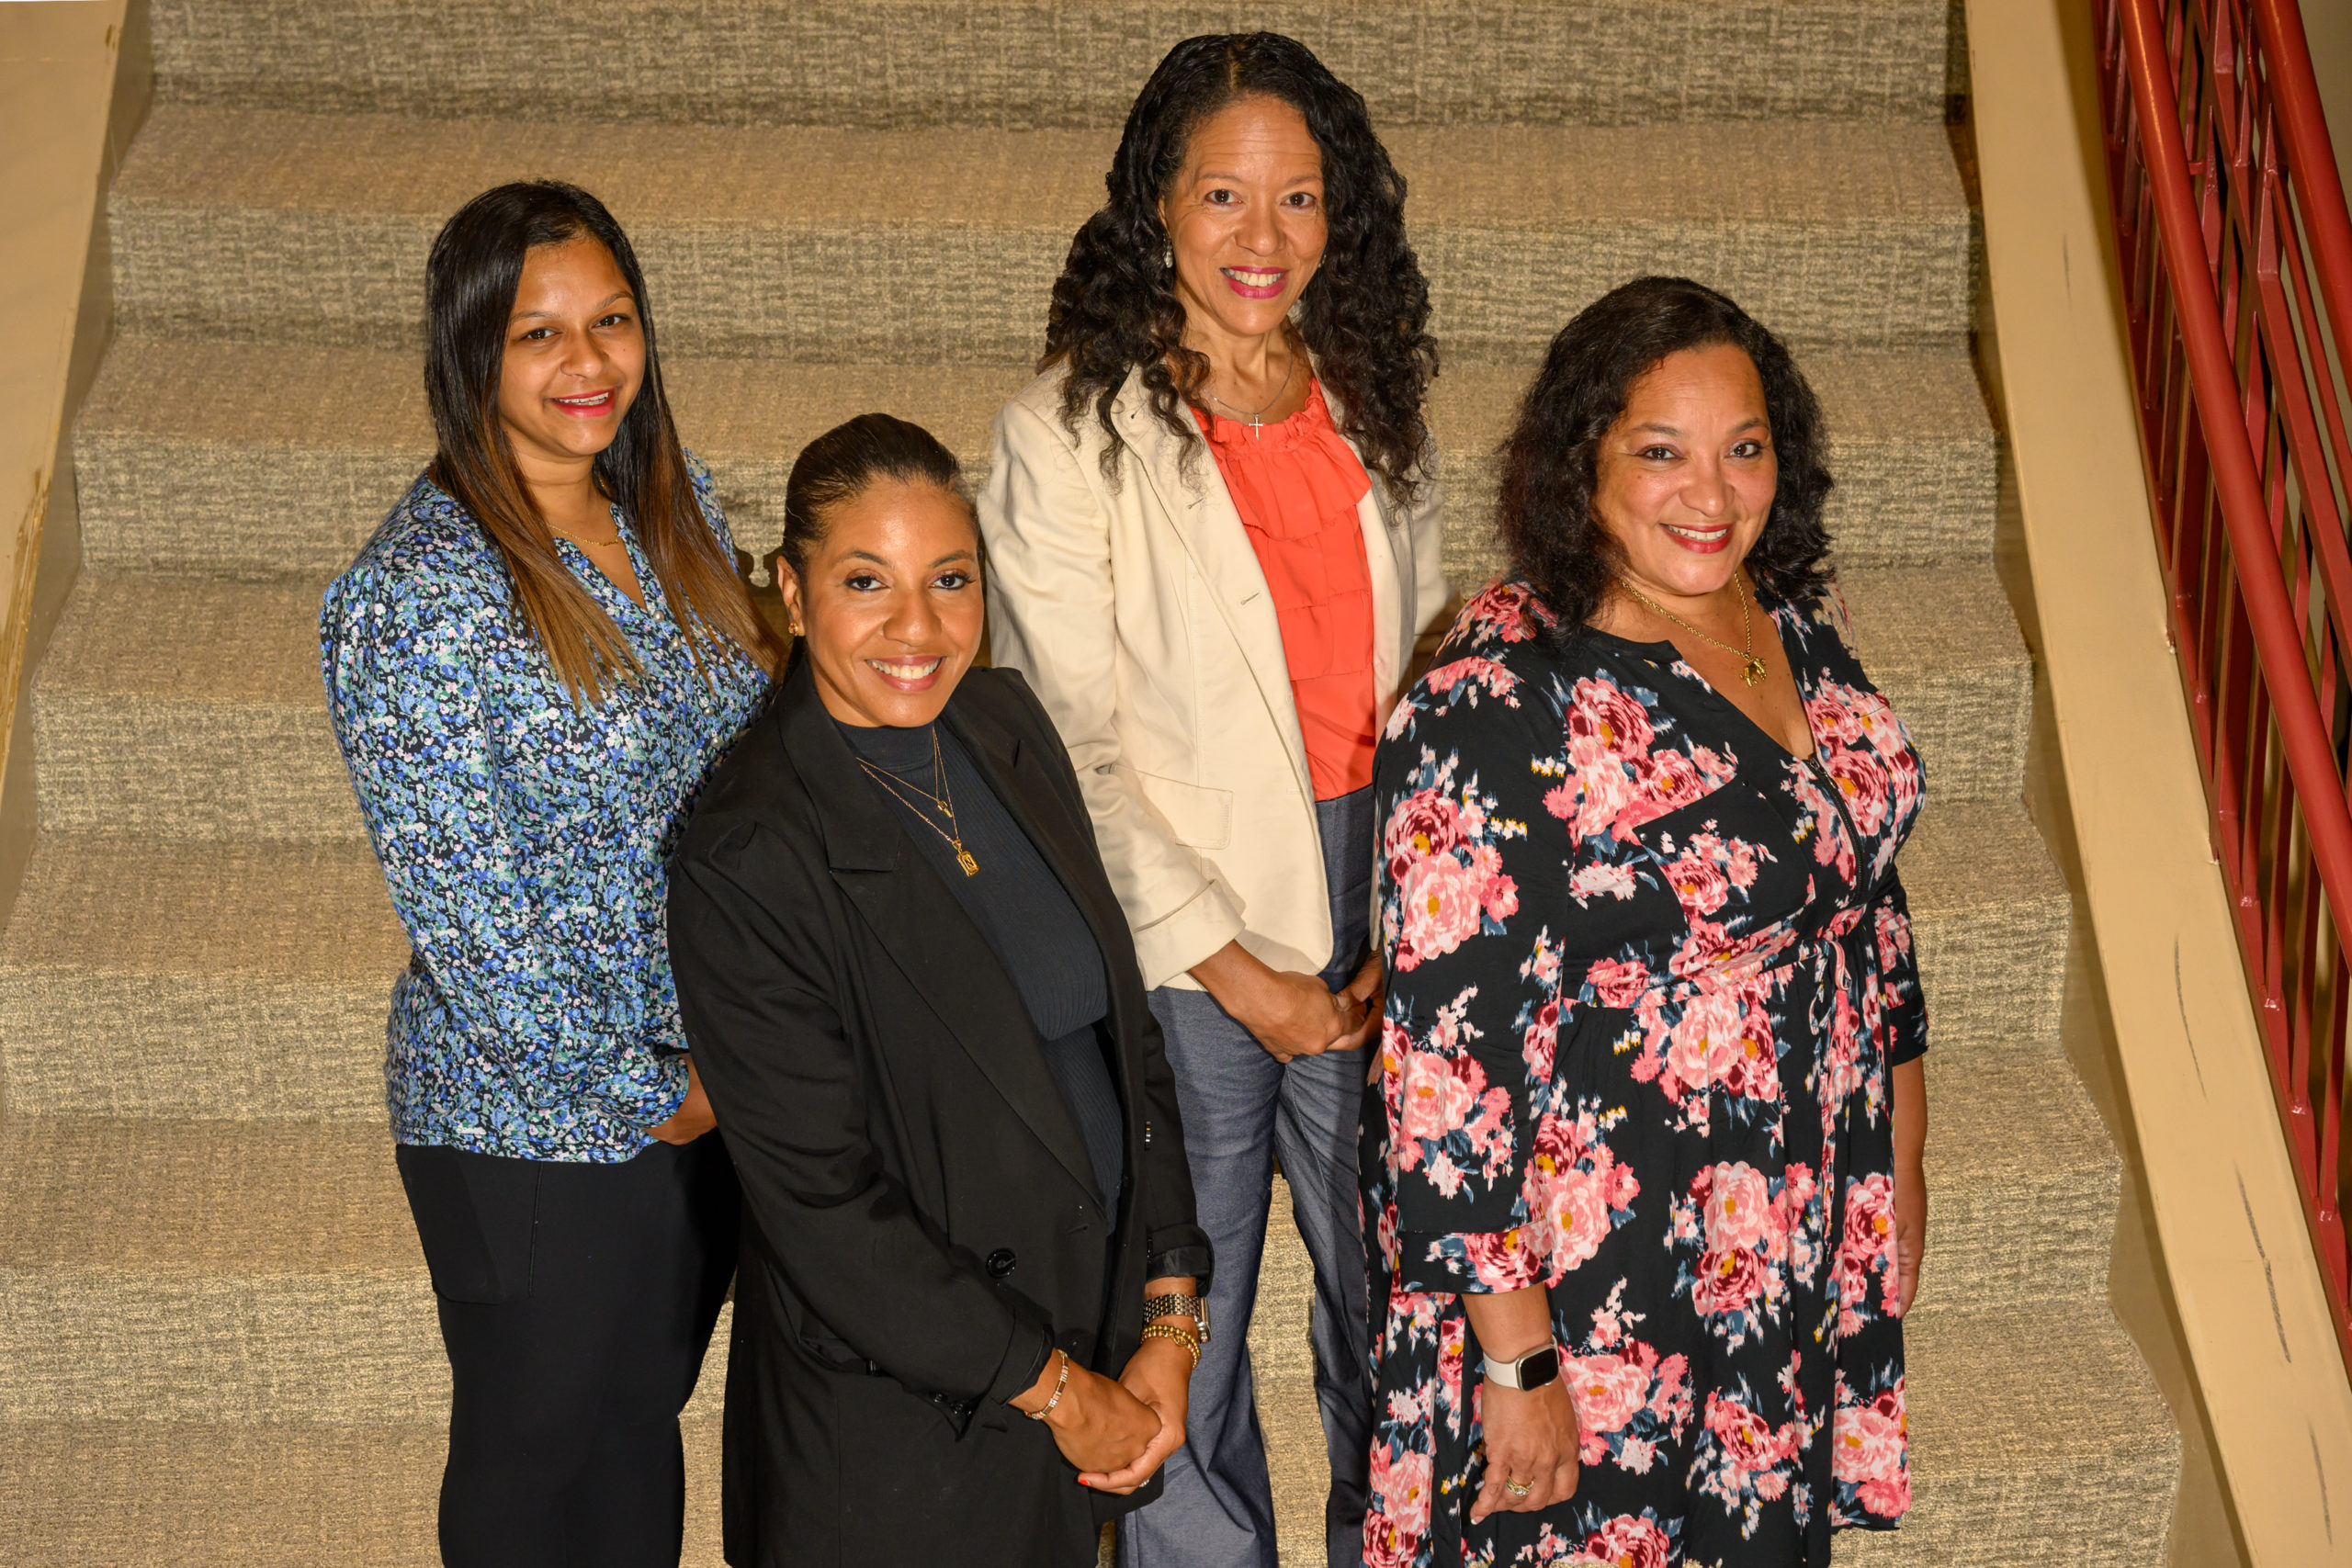 Left to right: Minutha Parker, Nikeisha Whatley-Leon, Cherylann Sherwood, Tracy Triplett (Ana Franco, not pictured) - Photo by Stanley Leary